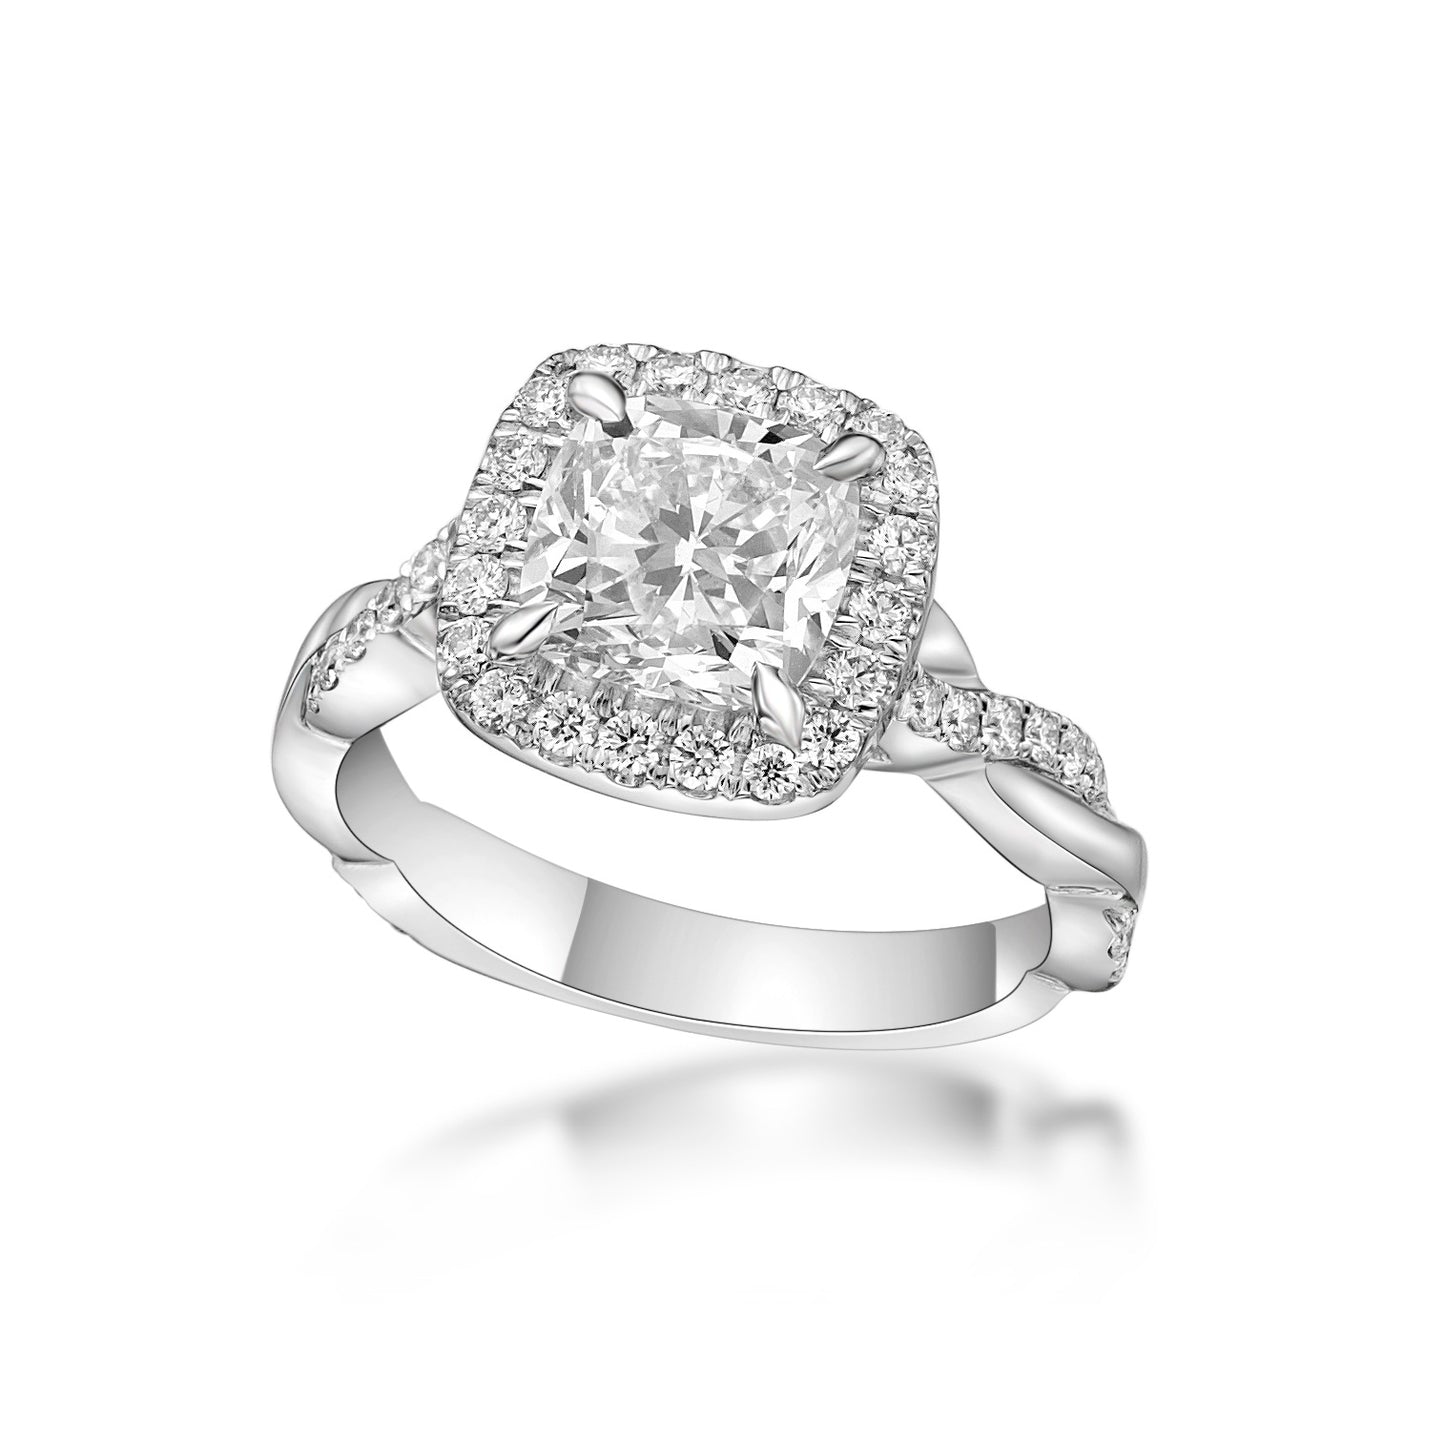 1.50ct Cushion Modified brilliant diamond in an 18K White Gold Diamond Halo engagement ring setting with a twisted diamond eternity band